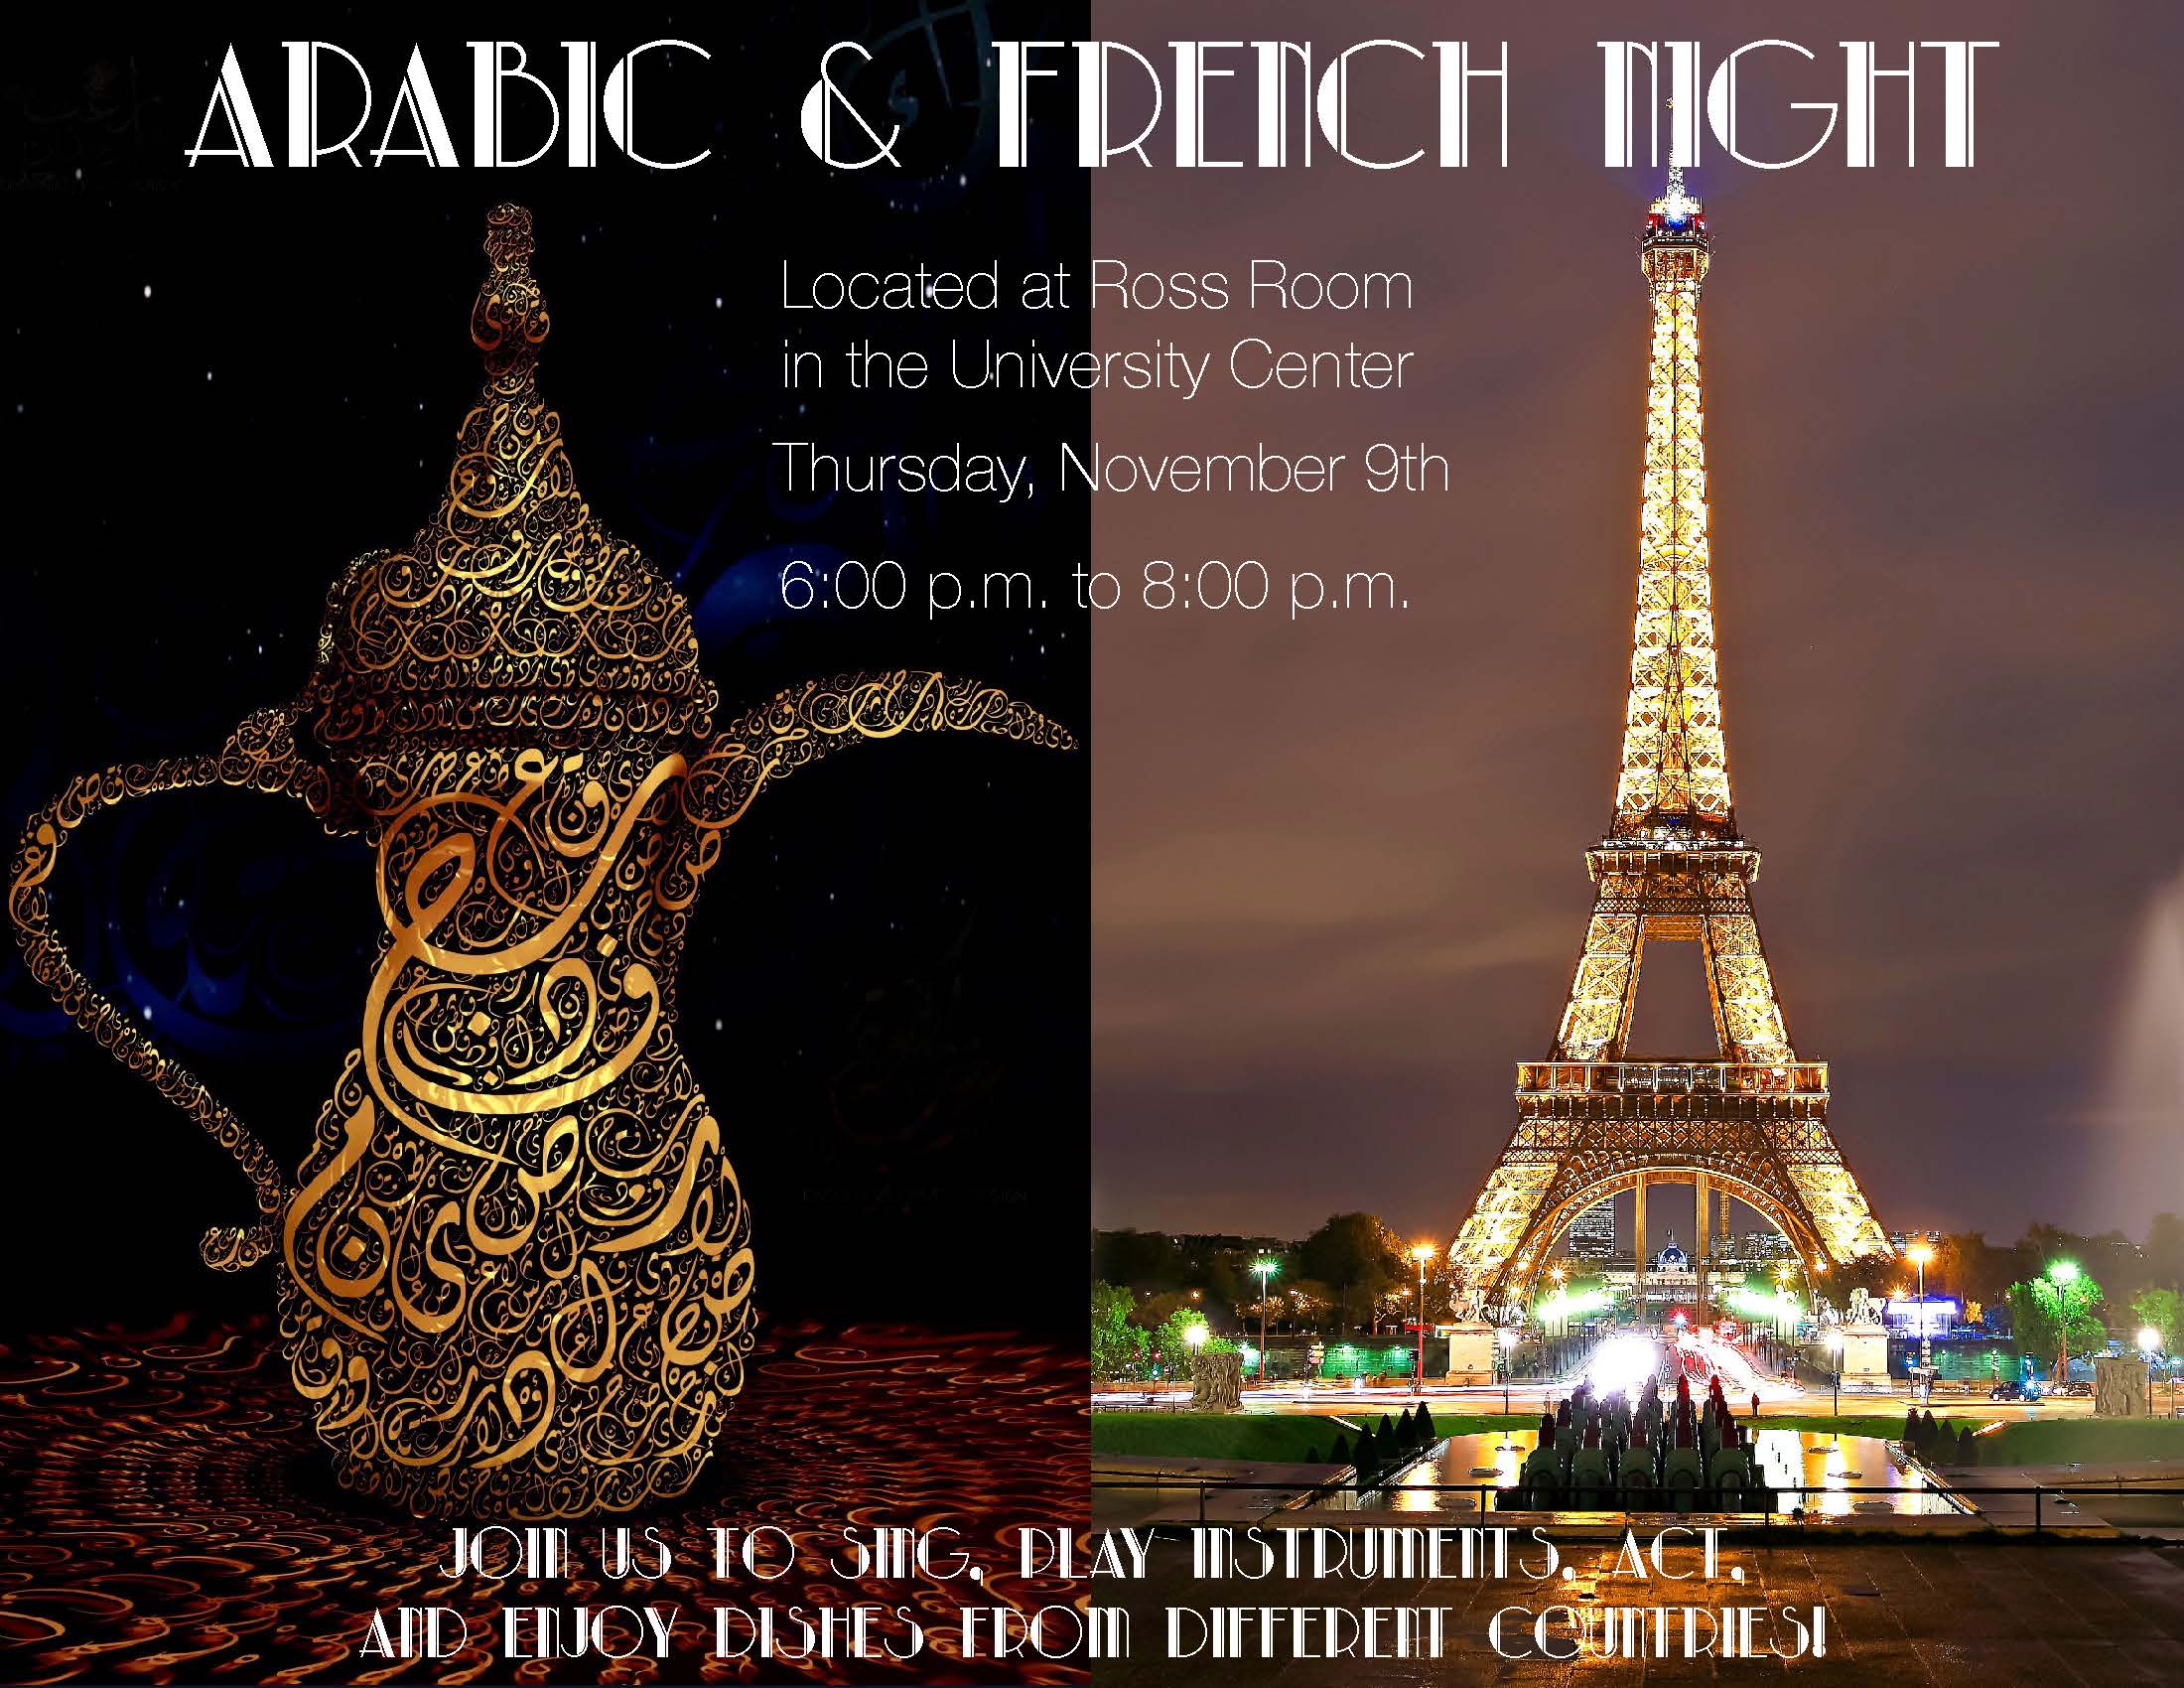 Arabic and French night Located at Ross Room in the university center Thursday, November 9th 6 to 8 PM. Join us to sing, play instruments, act, and enjoy dishes from different countries!